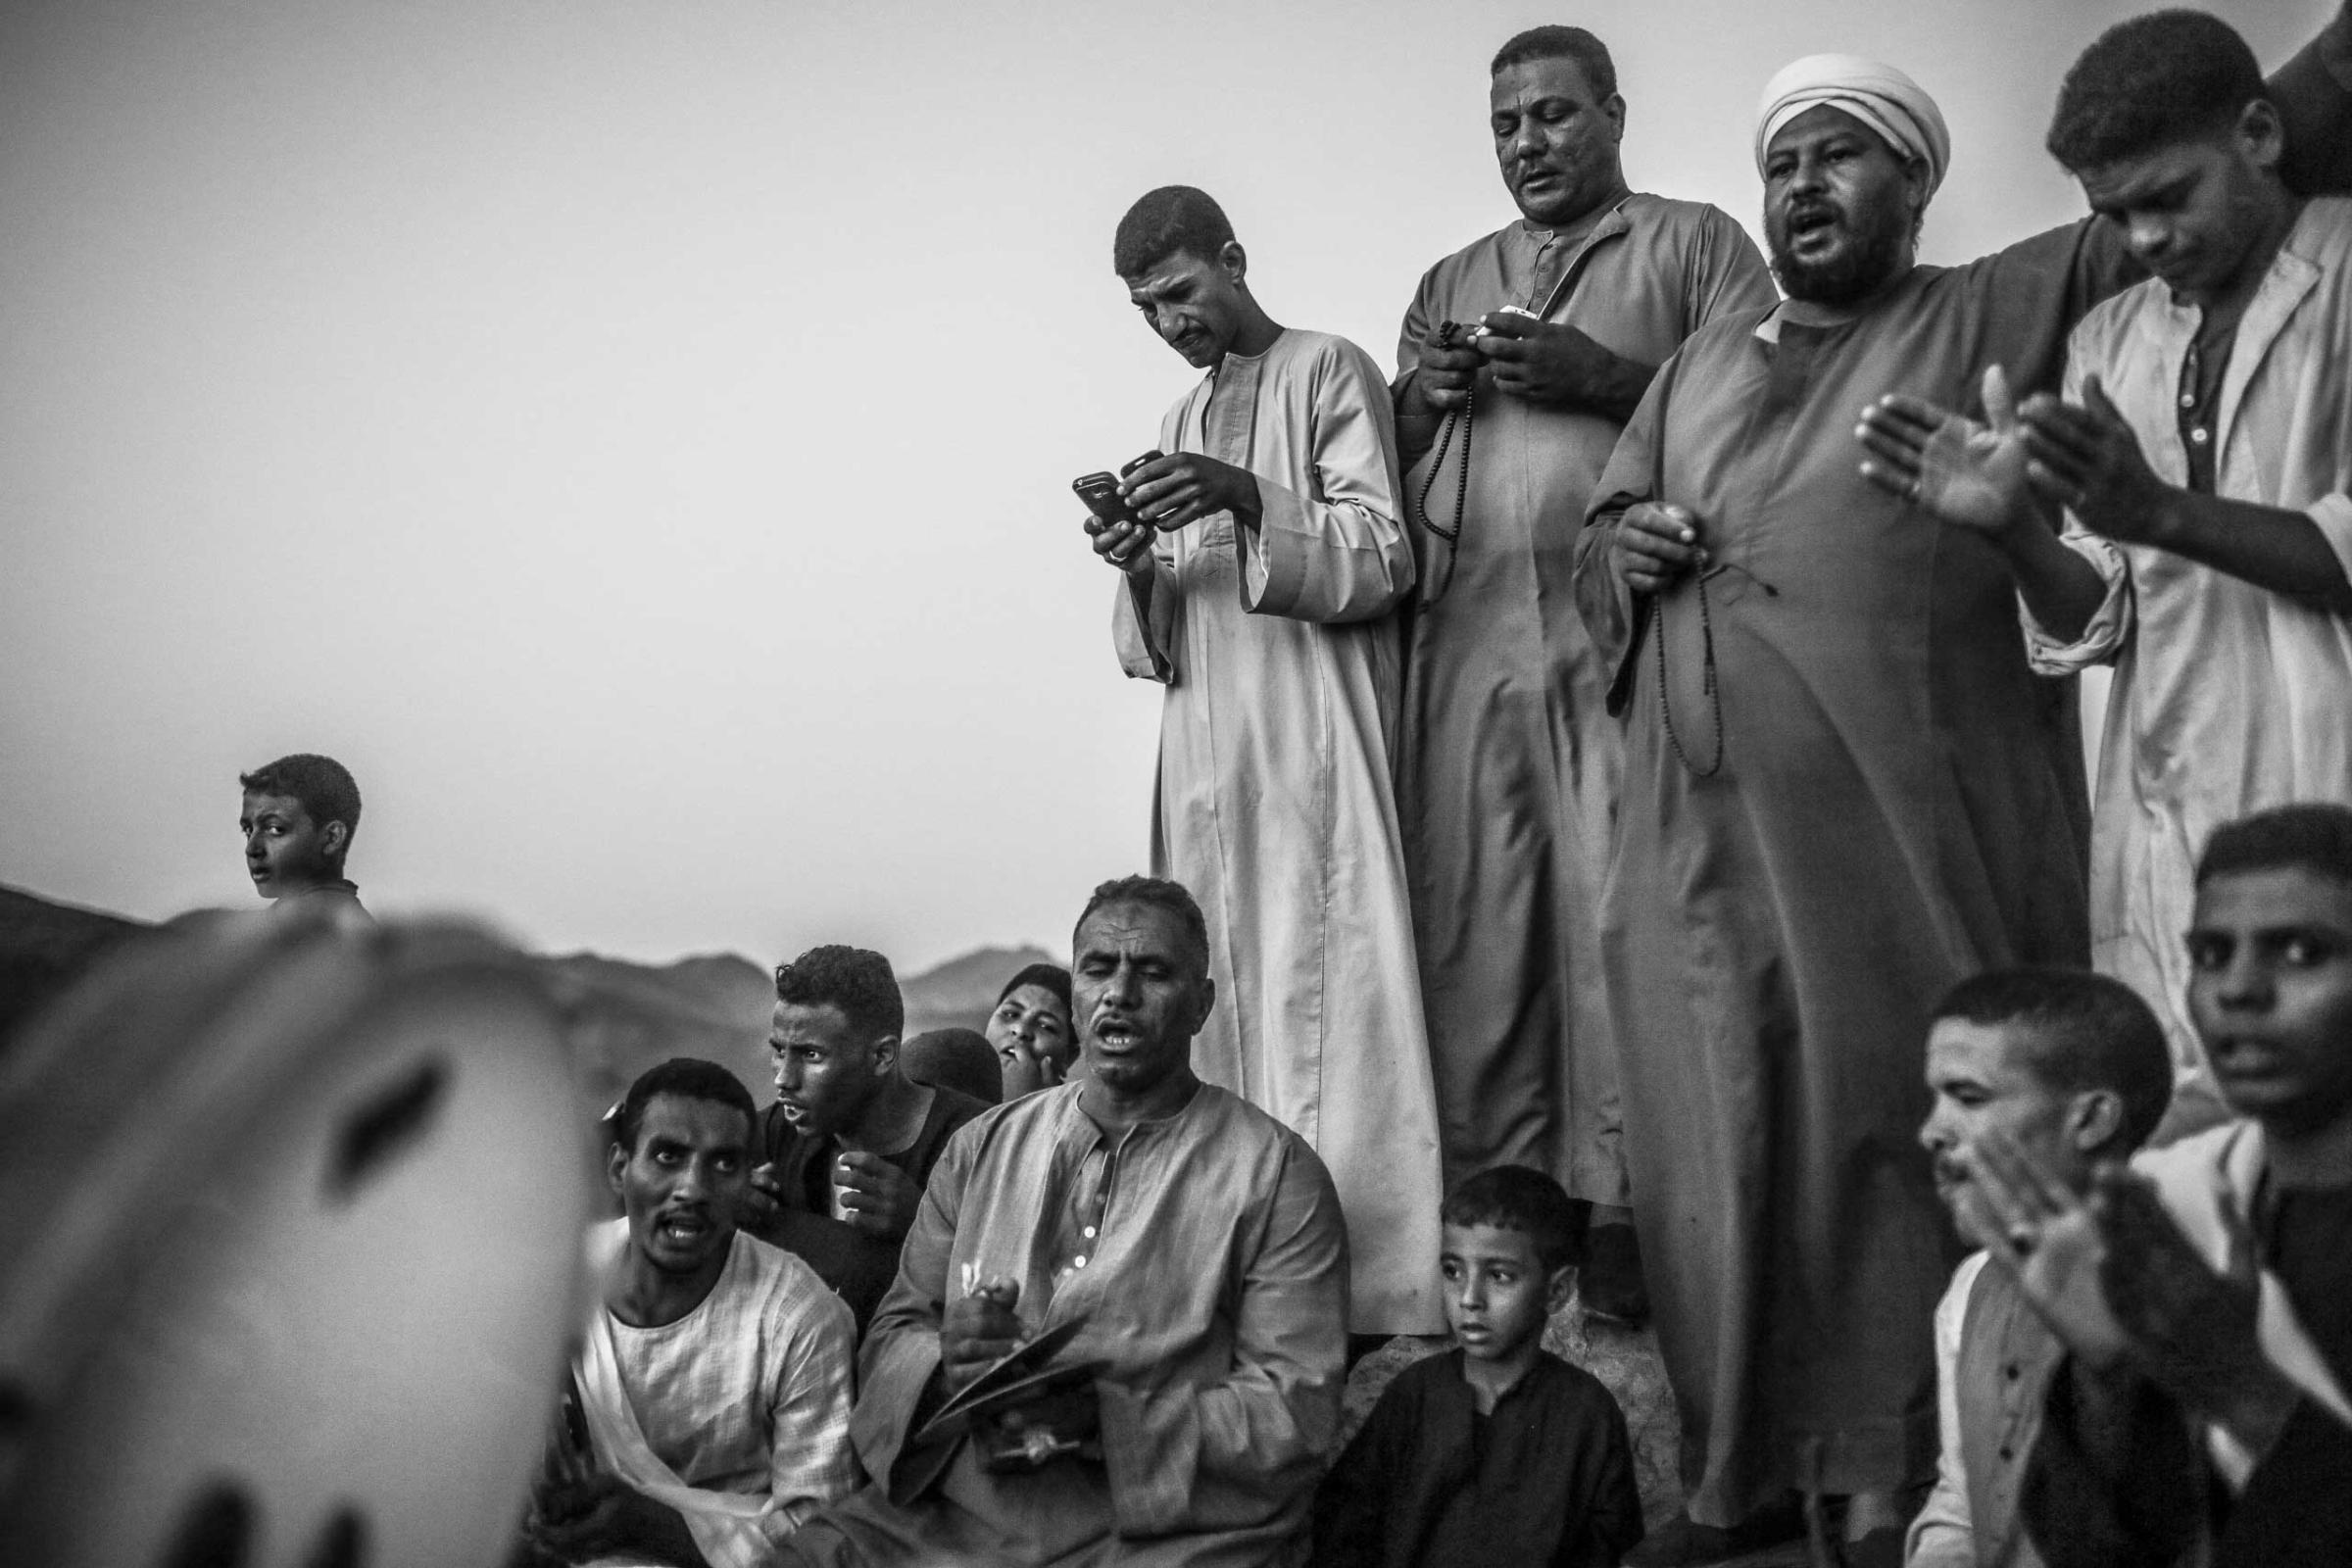 Sufi Muslims sing hymns and recite chants during the week-long celebrations of Abul-Hassan Al-Shazly festival in the Red Sea desert. Sept. 30, 2014.